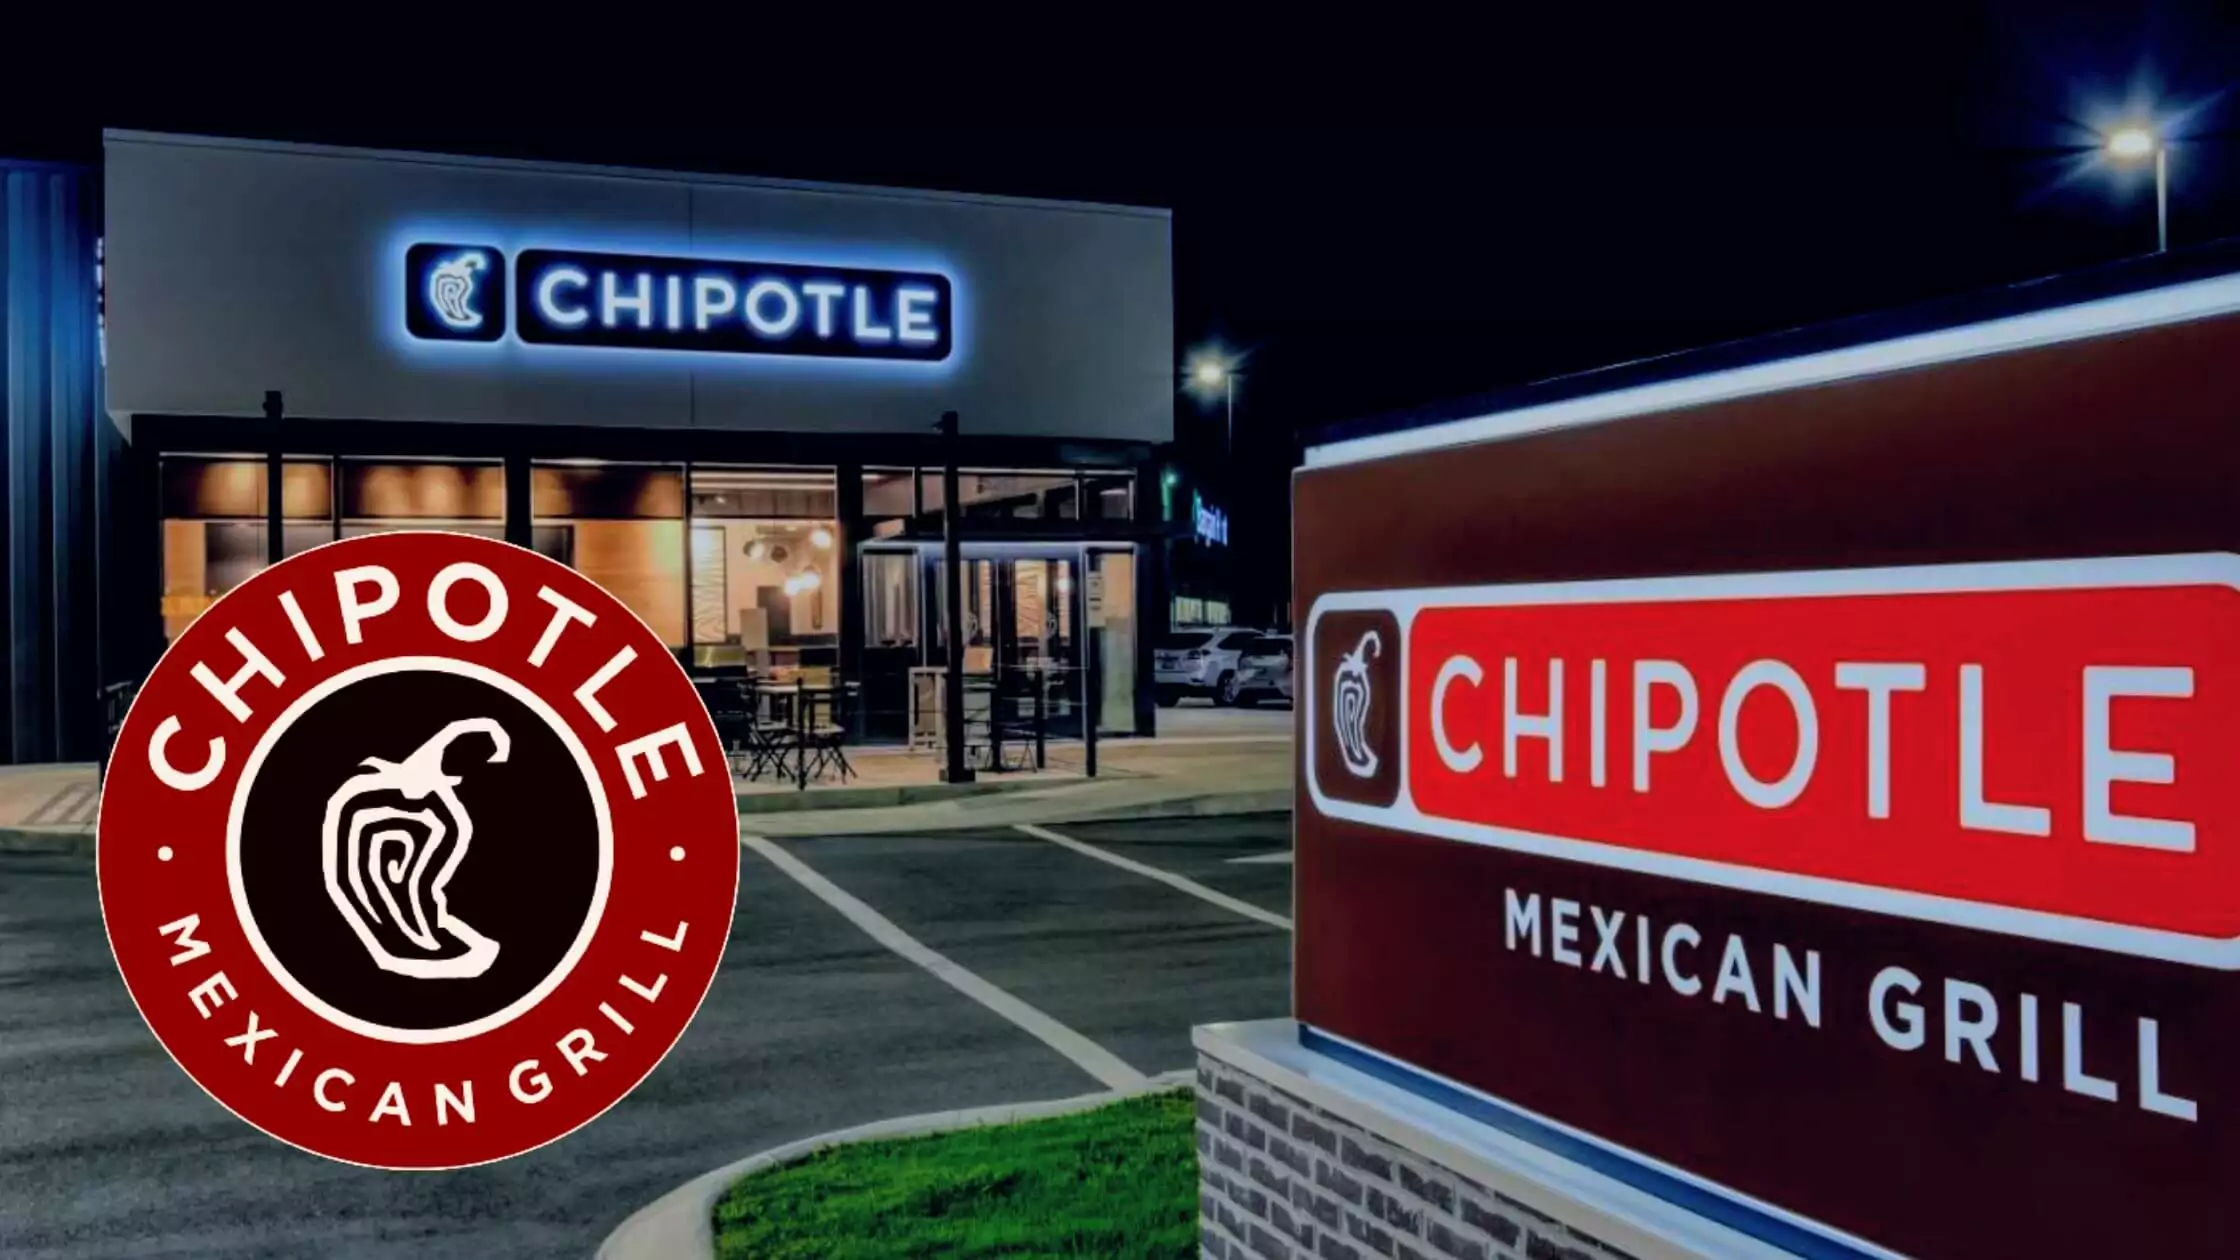 Chipotle Waves The Green Light To The Quesadilla 'Hack' From TikTok